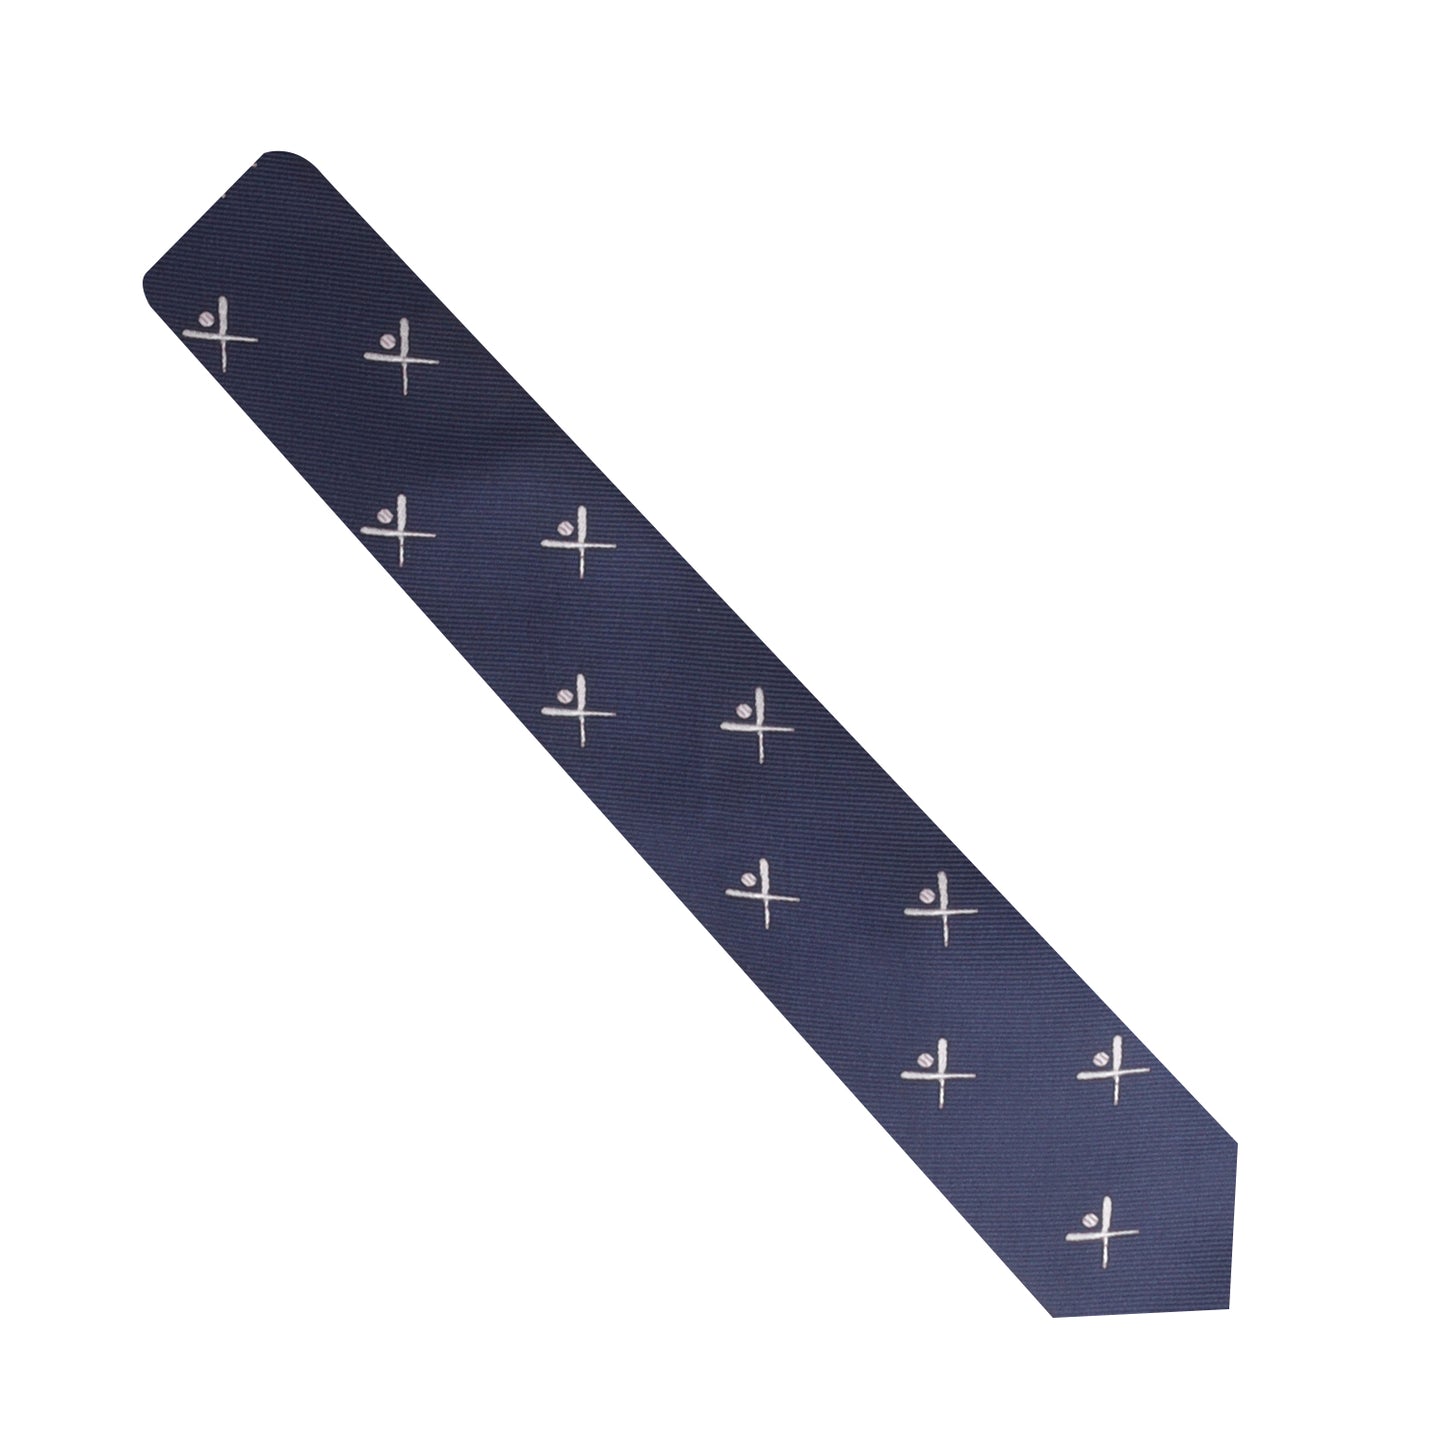 A Crossed Baseball Skinny Tie with crosses on it, perfect for adding a touch of elegance to any occasion.